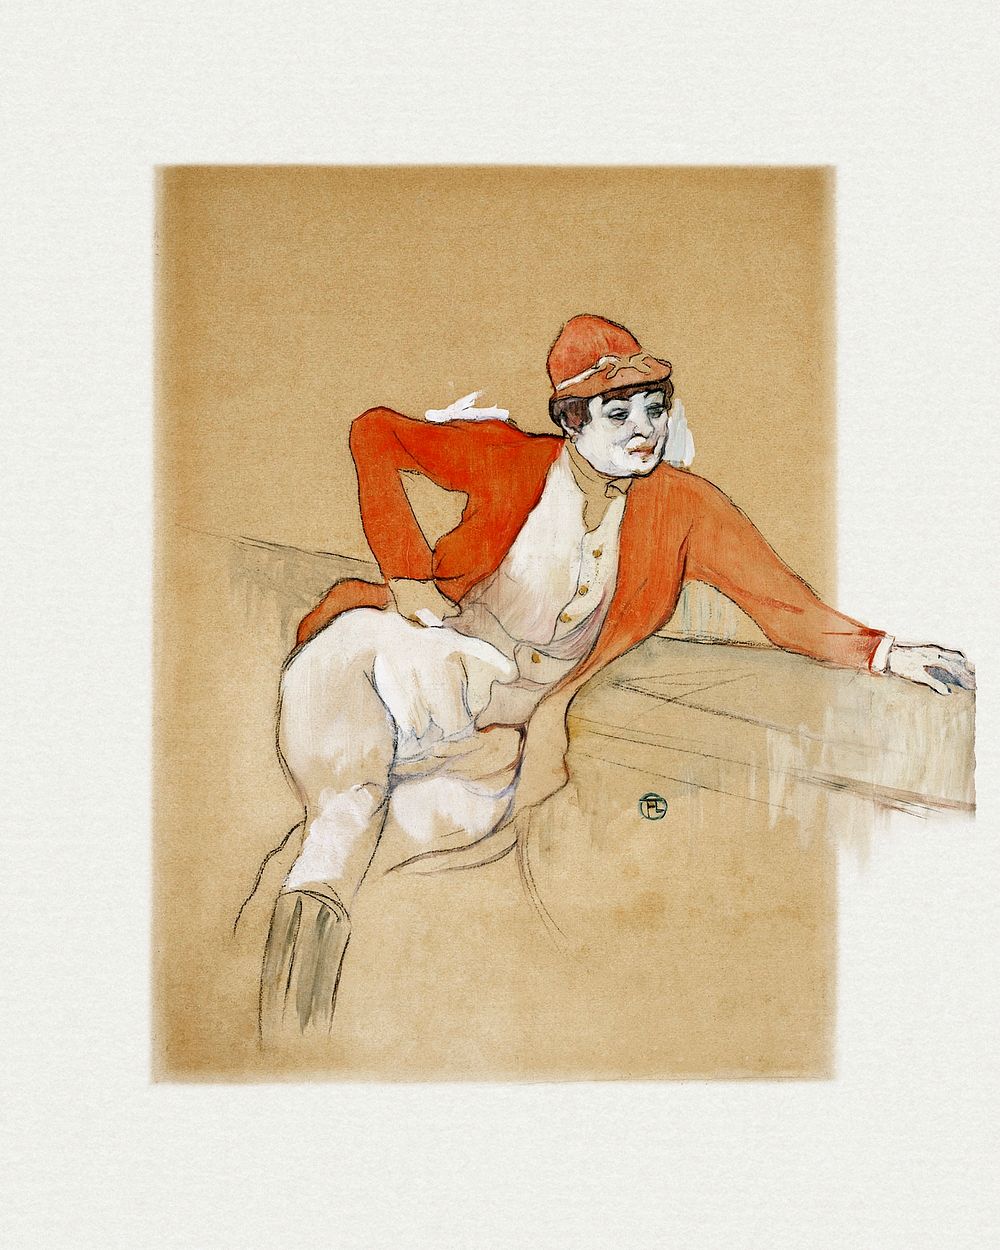 La Macarona in the Costume of a Jockey (1893) painting in high resolution by Henri de Toulouse&ndash;Lautrec. Original from…